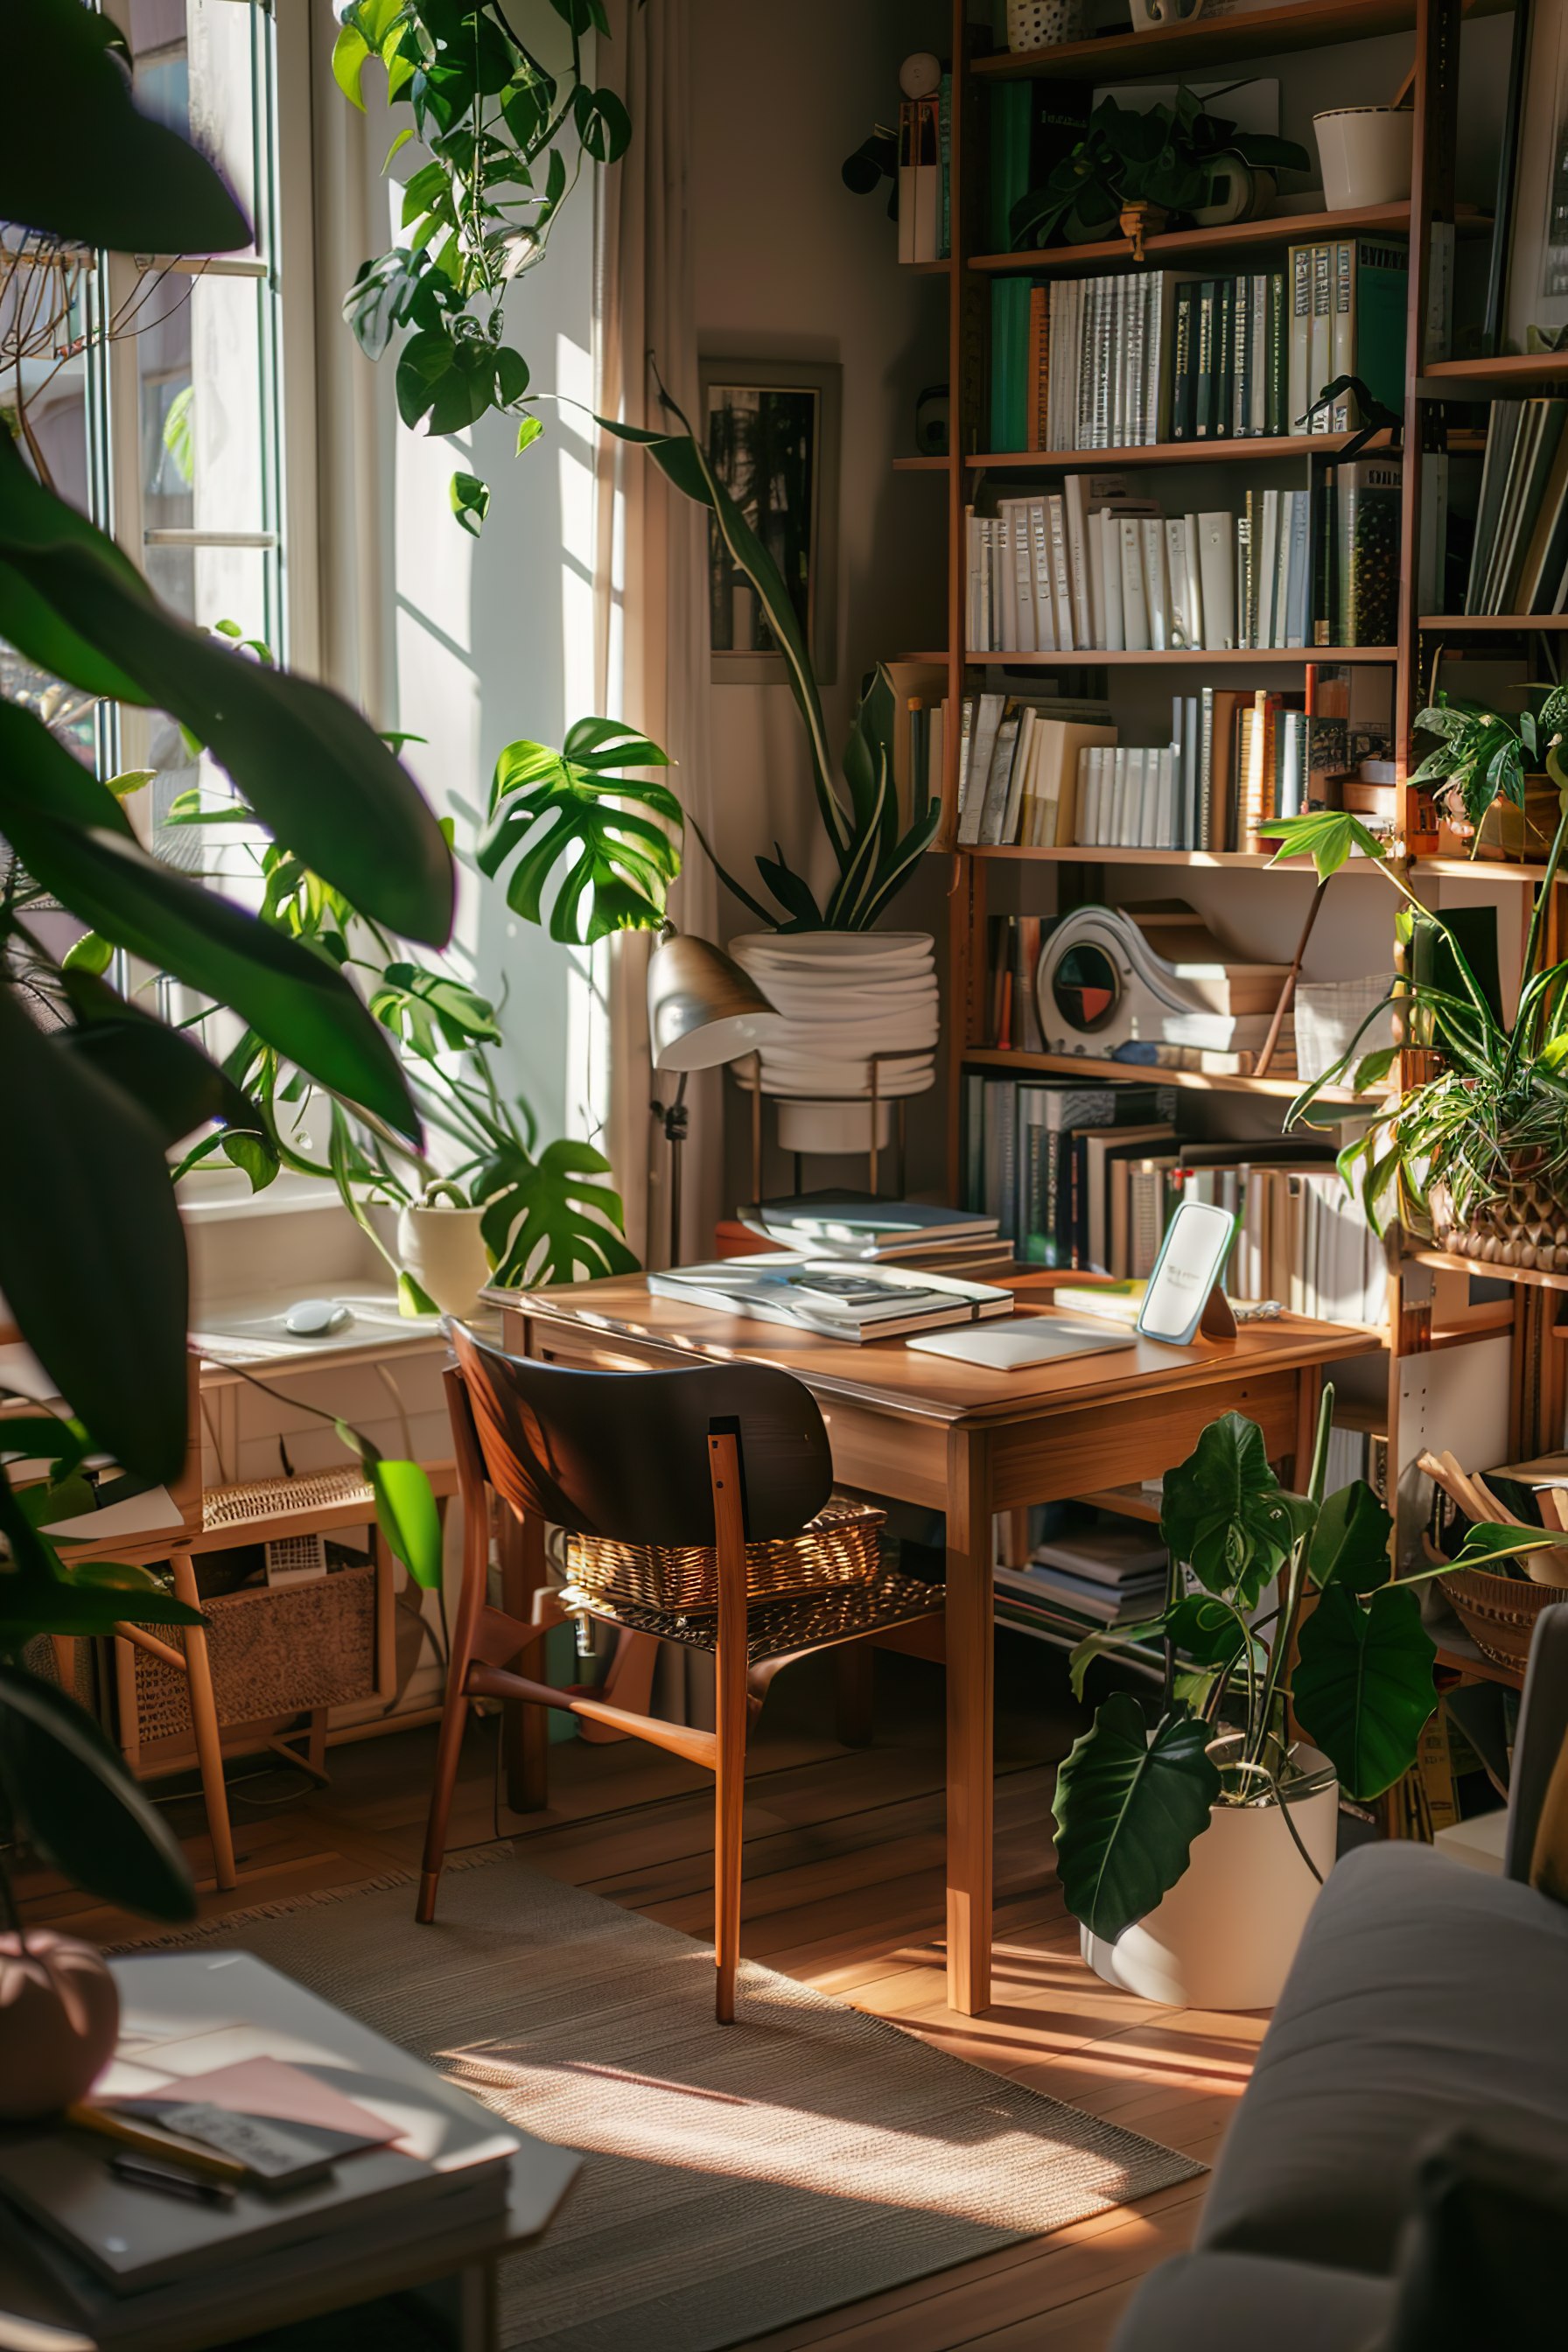 A cozy home study filled with plants, sunlight filtering through windows, a wooden desk and shelves stacked with books.